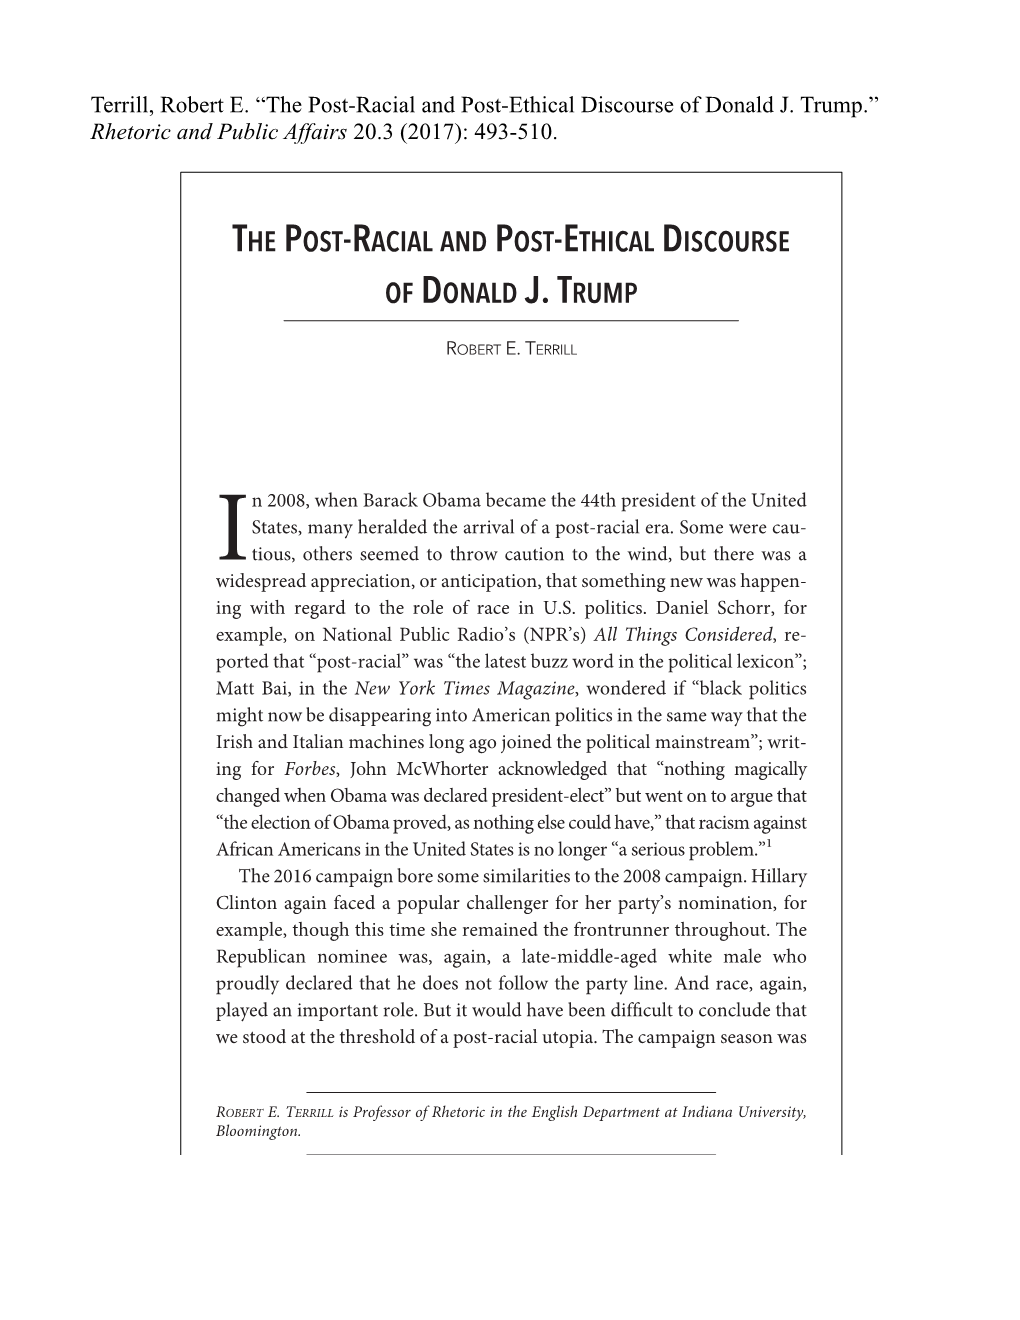 Terrill, Robert E. “The Post-Racial and Post-Ethical Discourse of Donald J